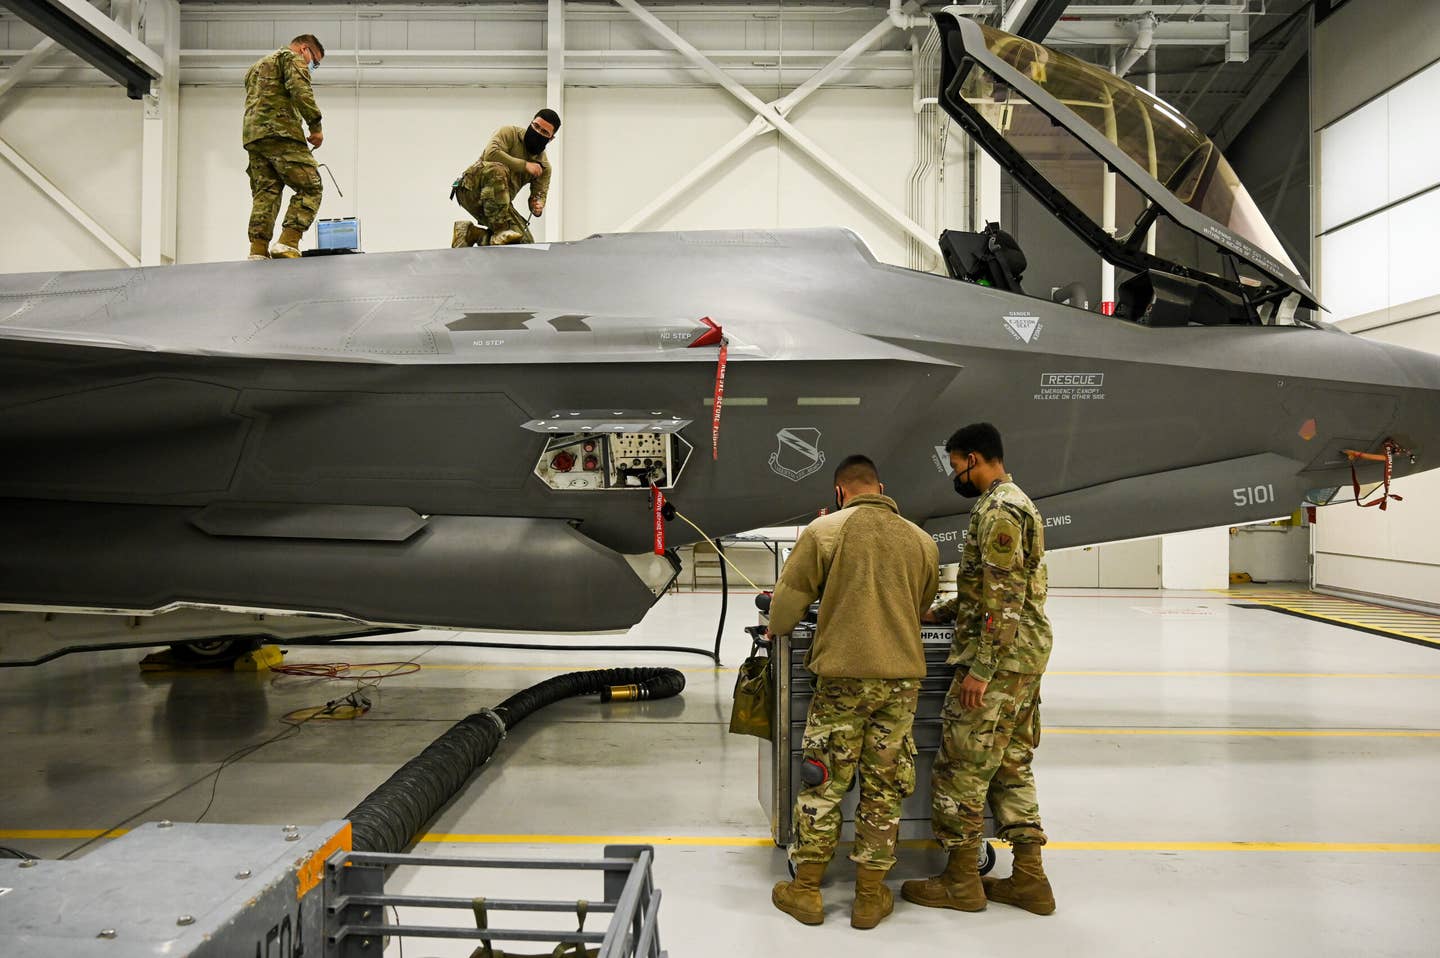 Maintainers perform maintenance on a F-35A Lightning II at Hill Air Force Base, Utah, March 18, 2021. (U.S. Air Force photo by R. Nial Bradshaw)